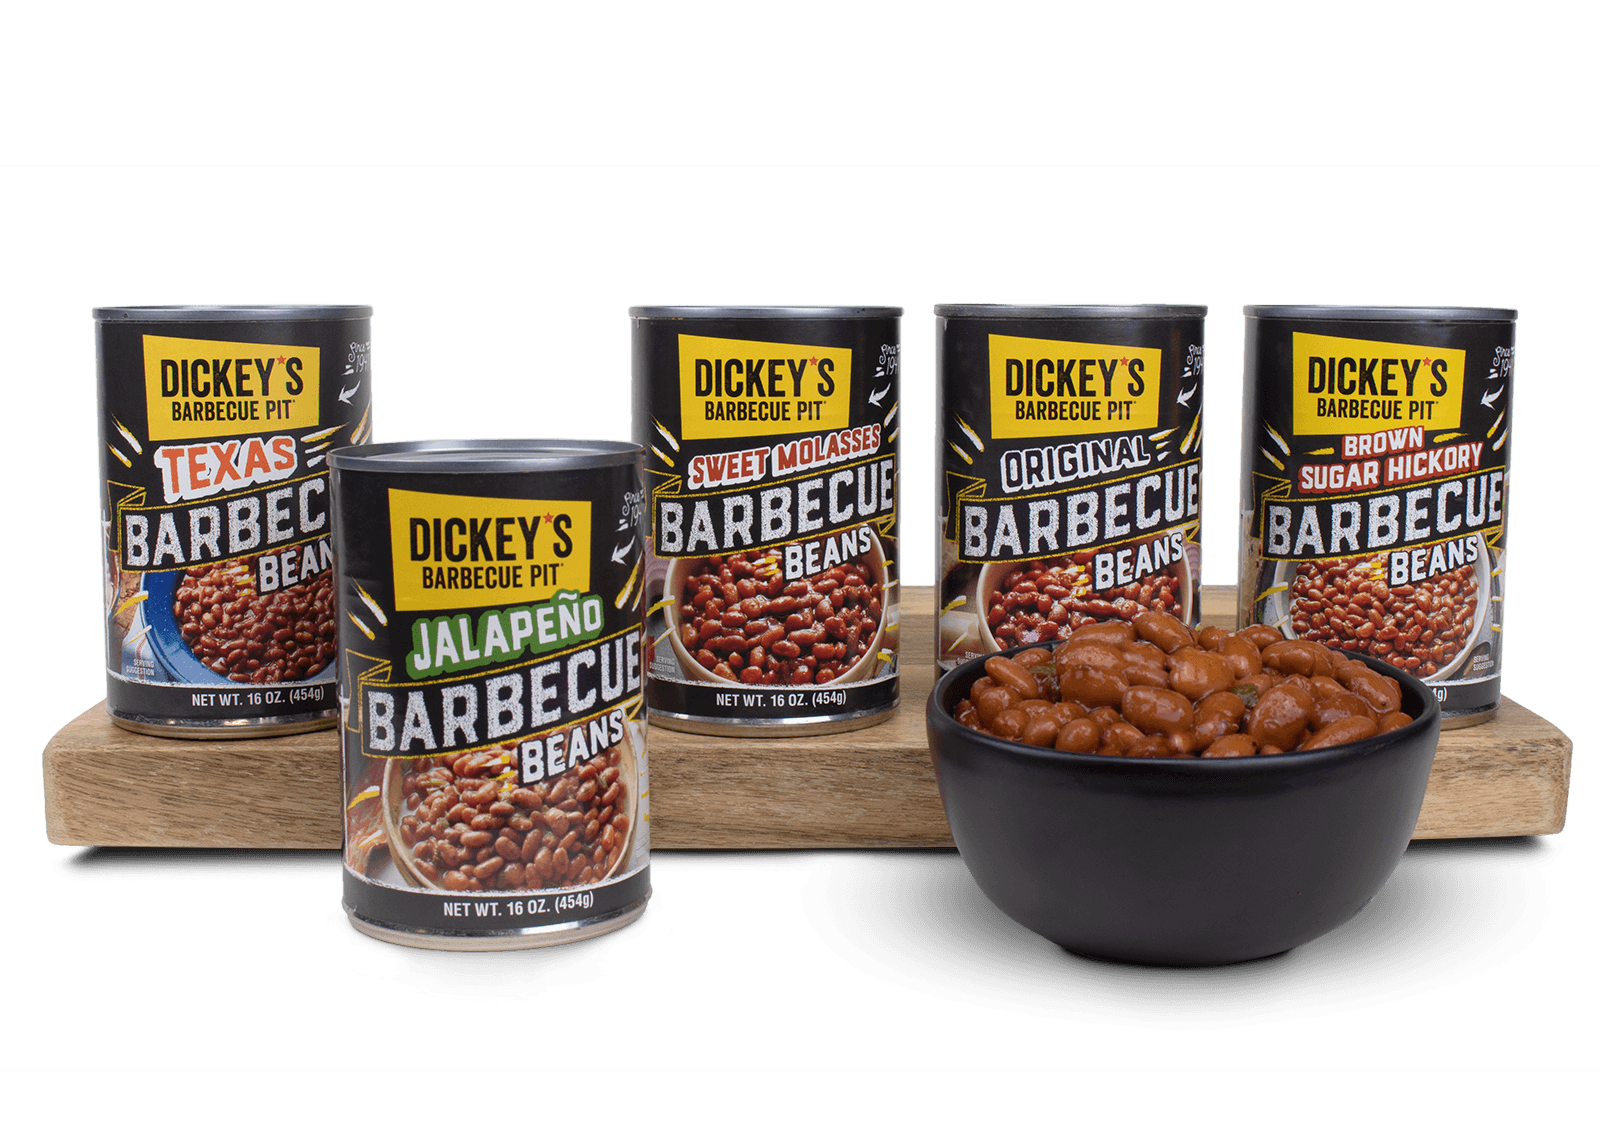 Franchising.com: Dickey's Beans in Homeland Grocery 